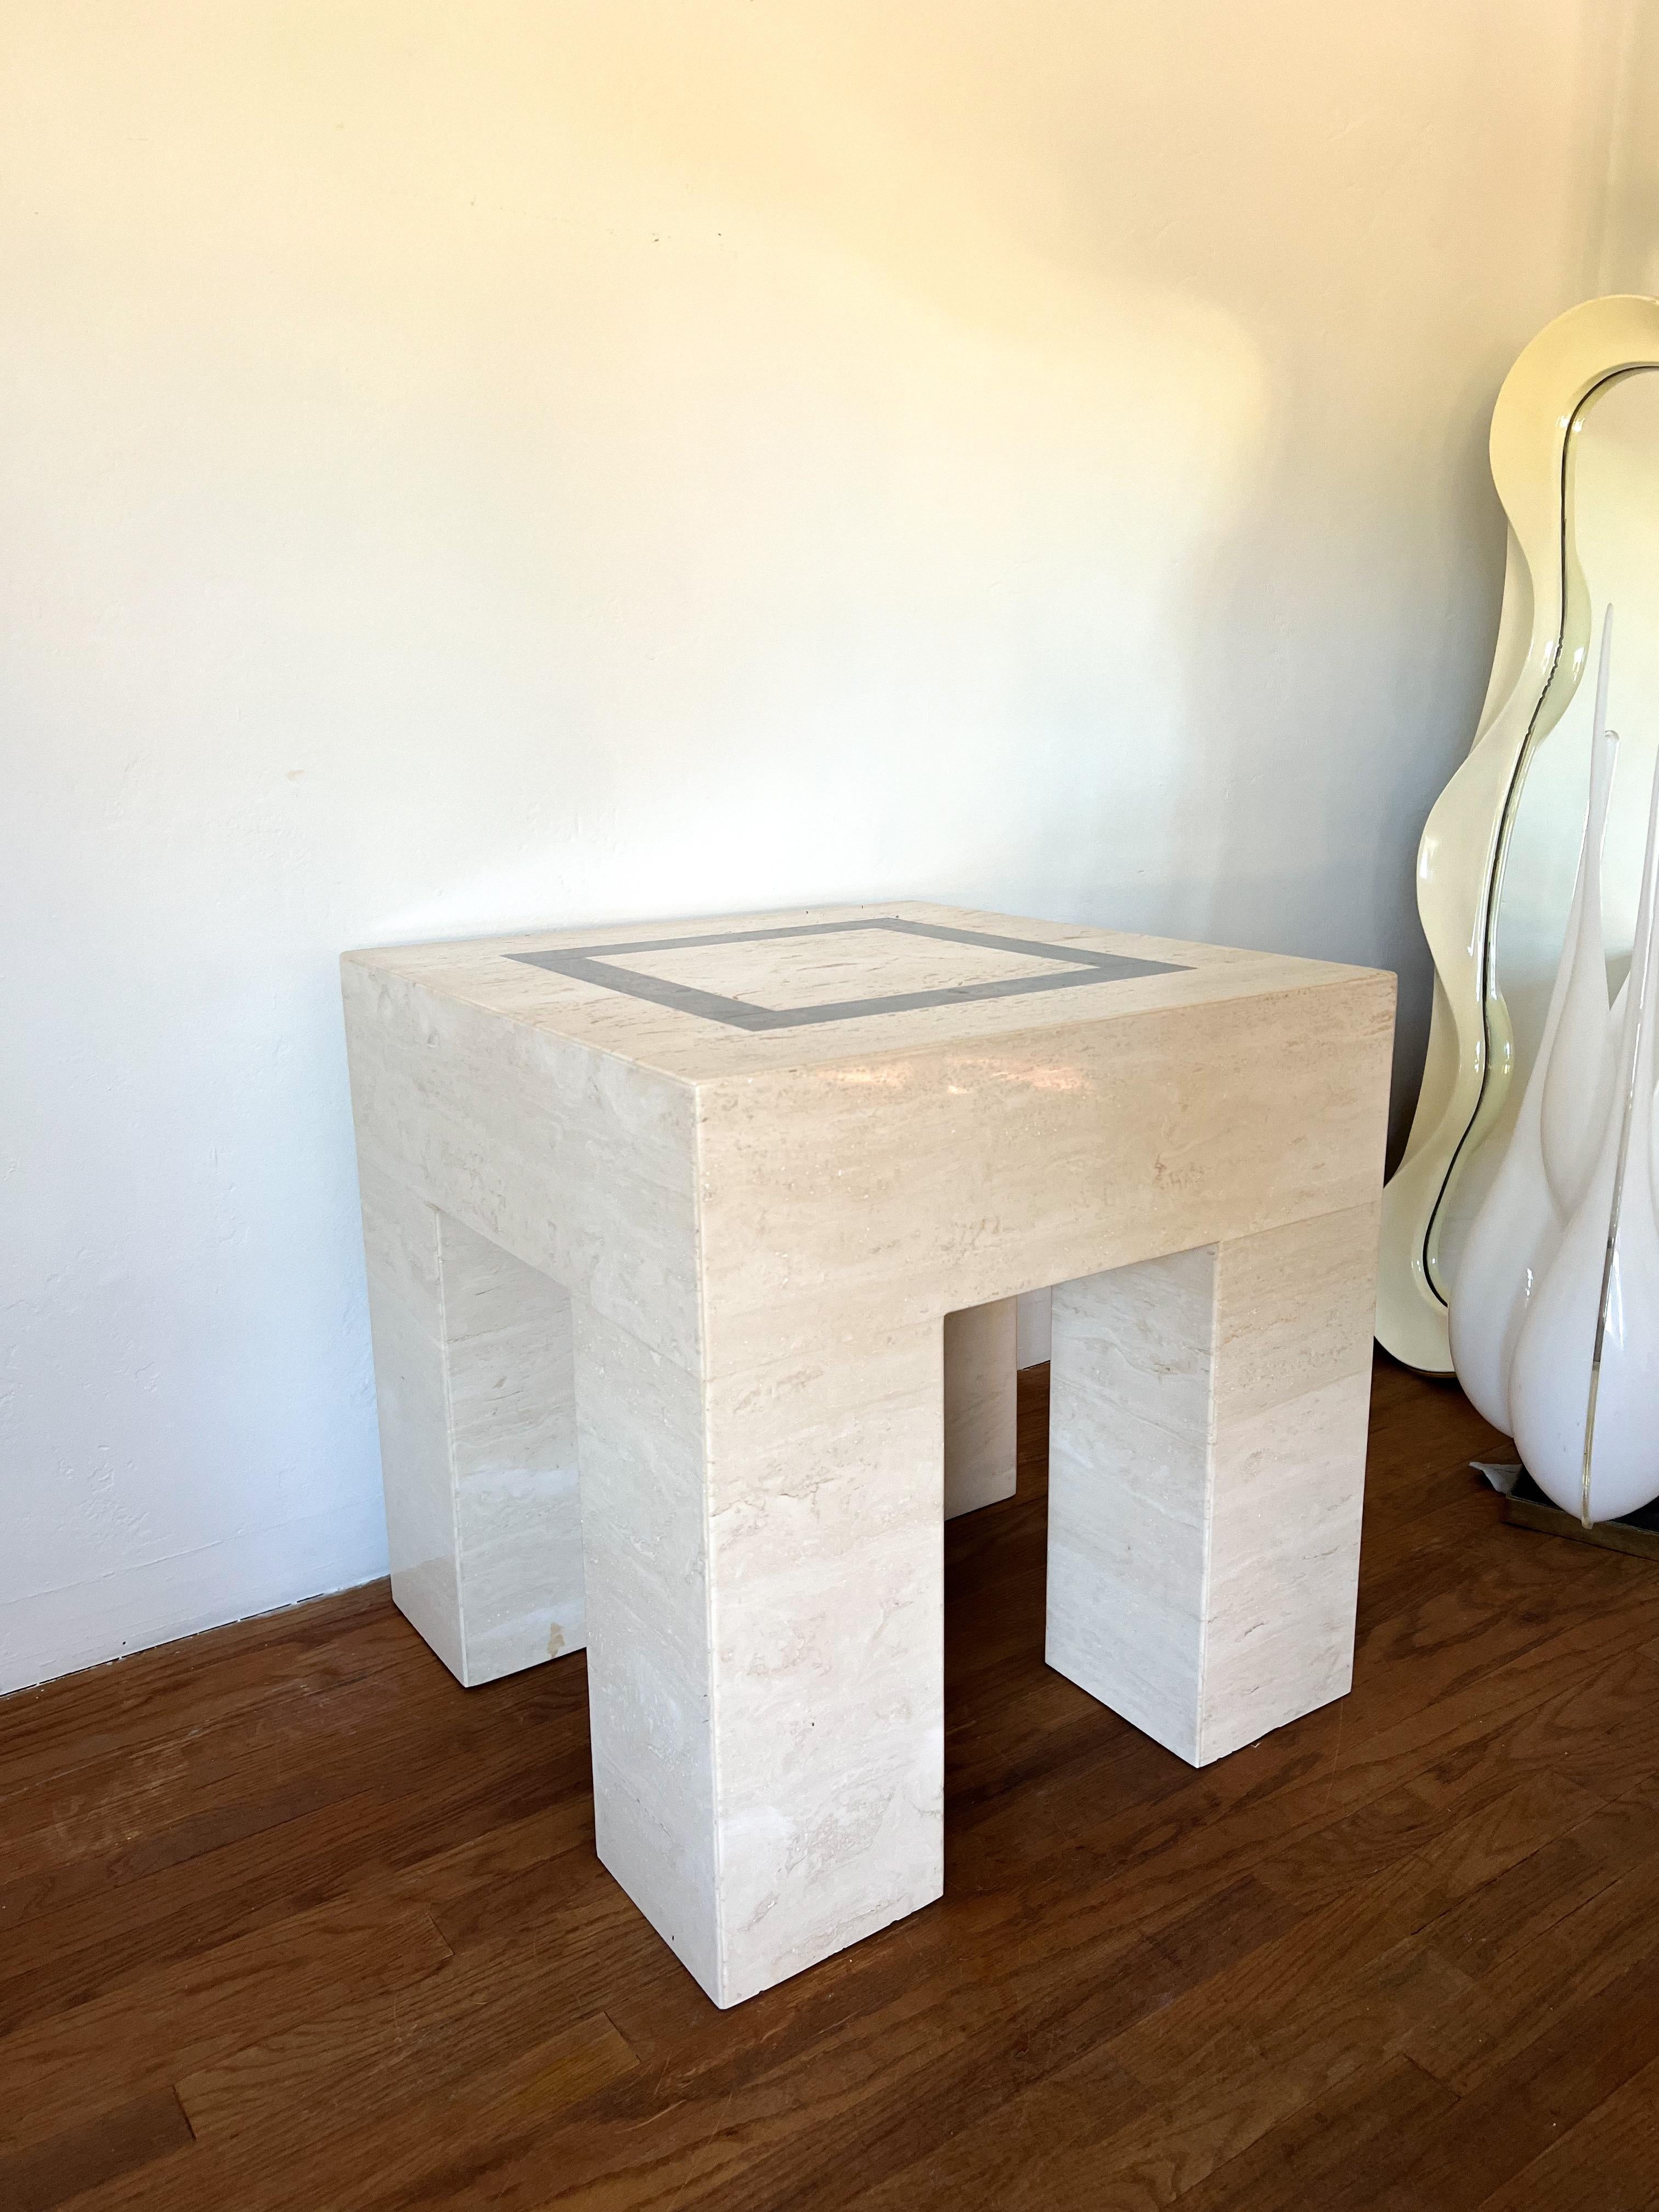 This is a beautifully-crafted sculptural side table made out of solid travertine. The legs are chunky 